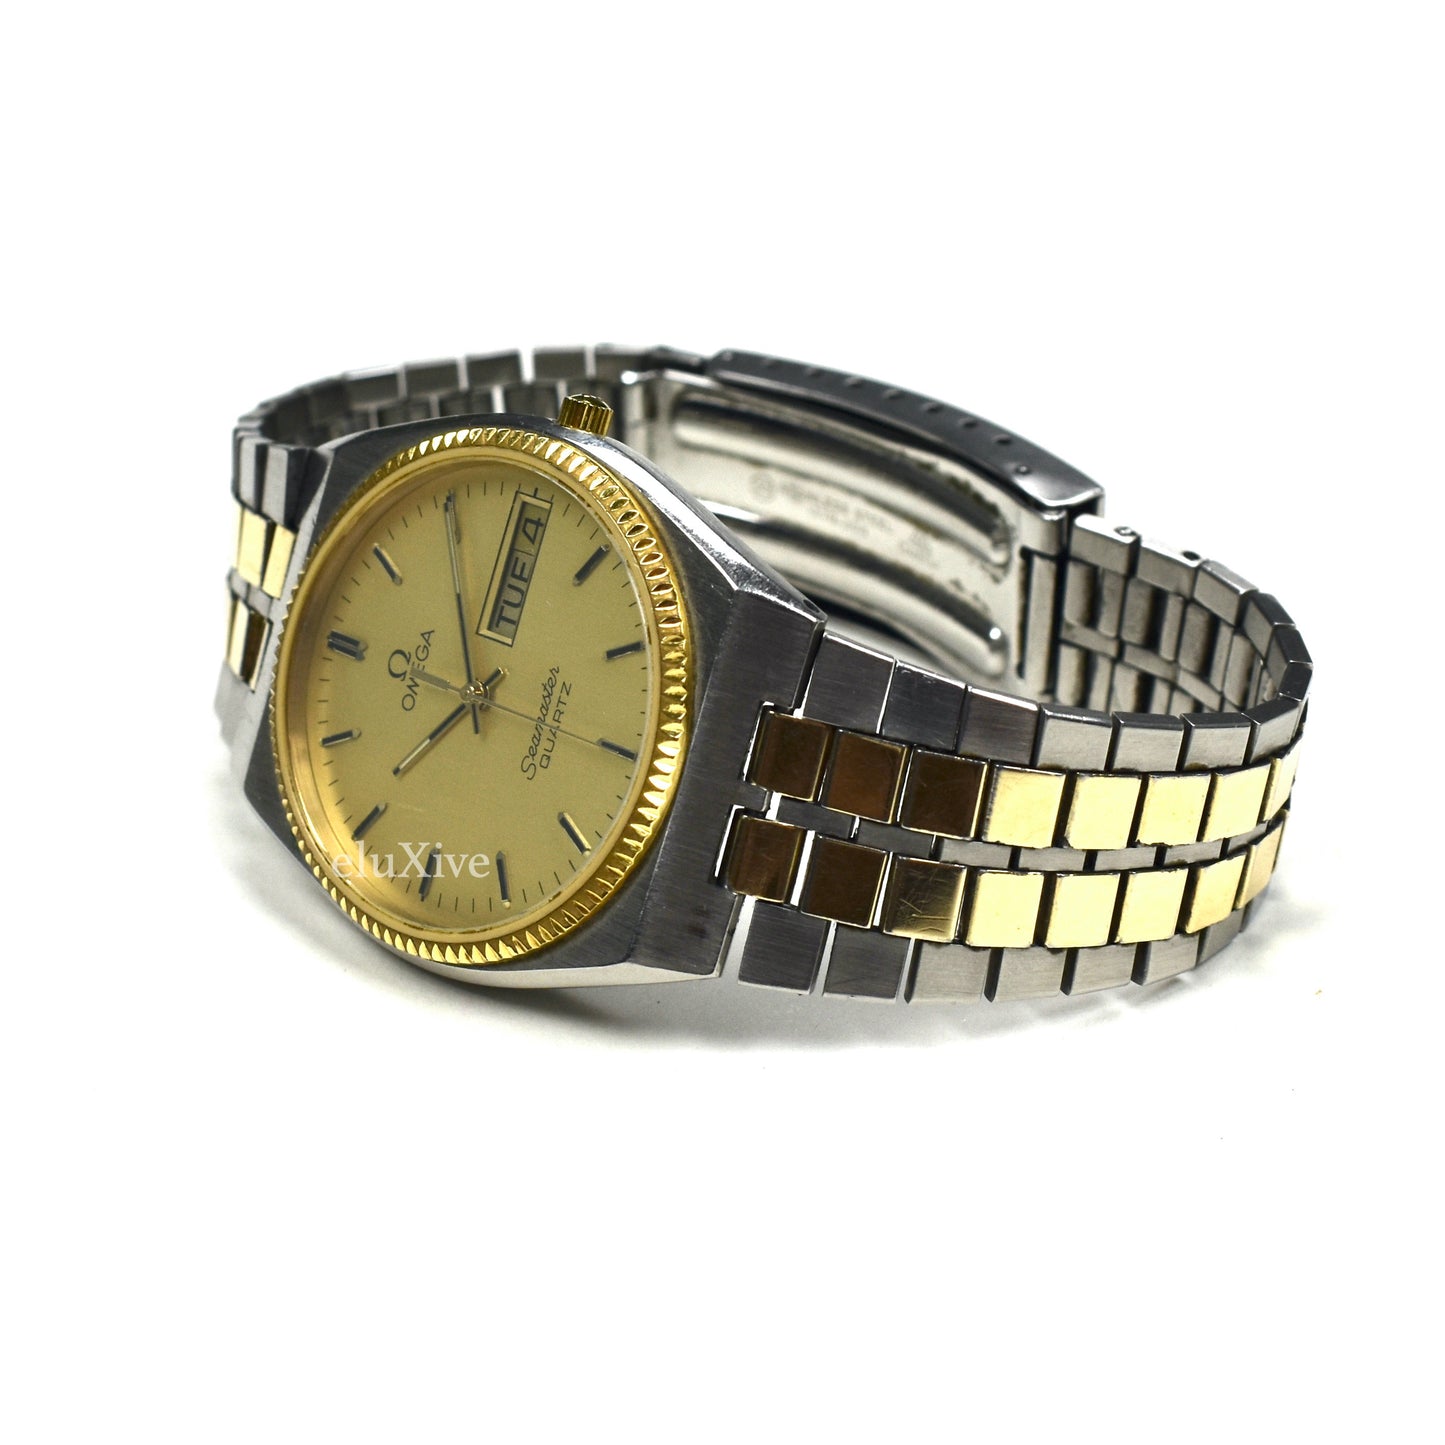 Omega - Seamaster Day-Date 1425 18K/SS Watch